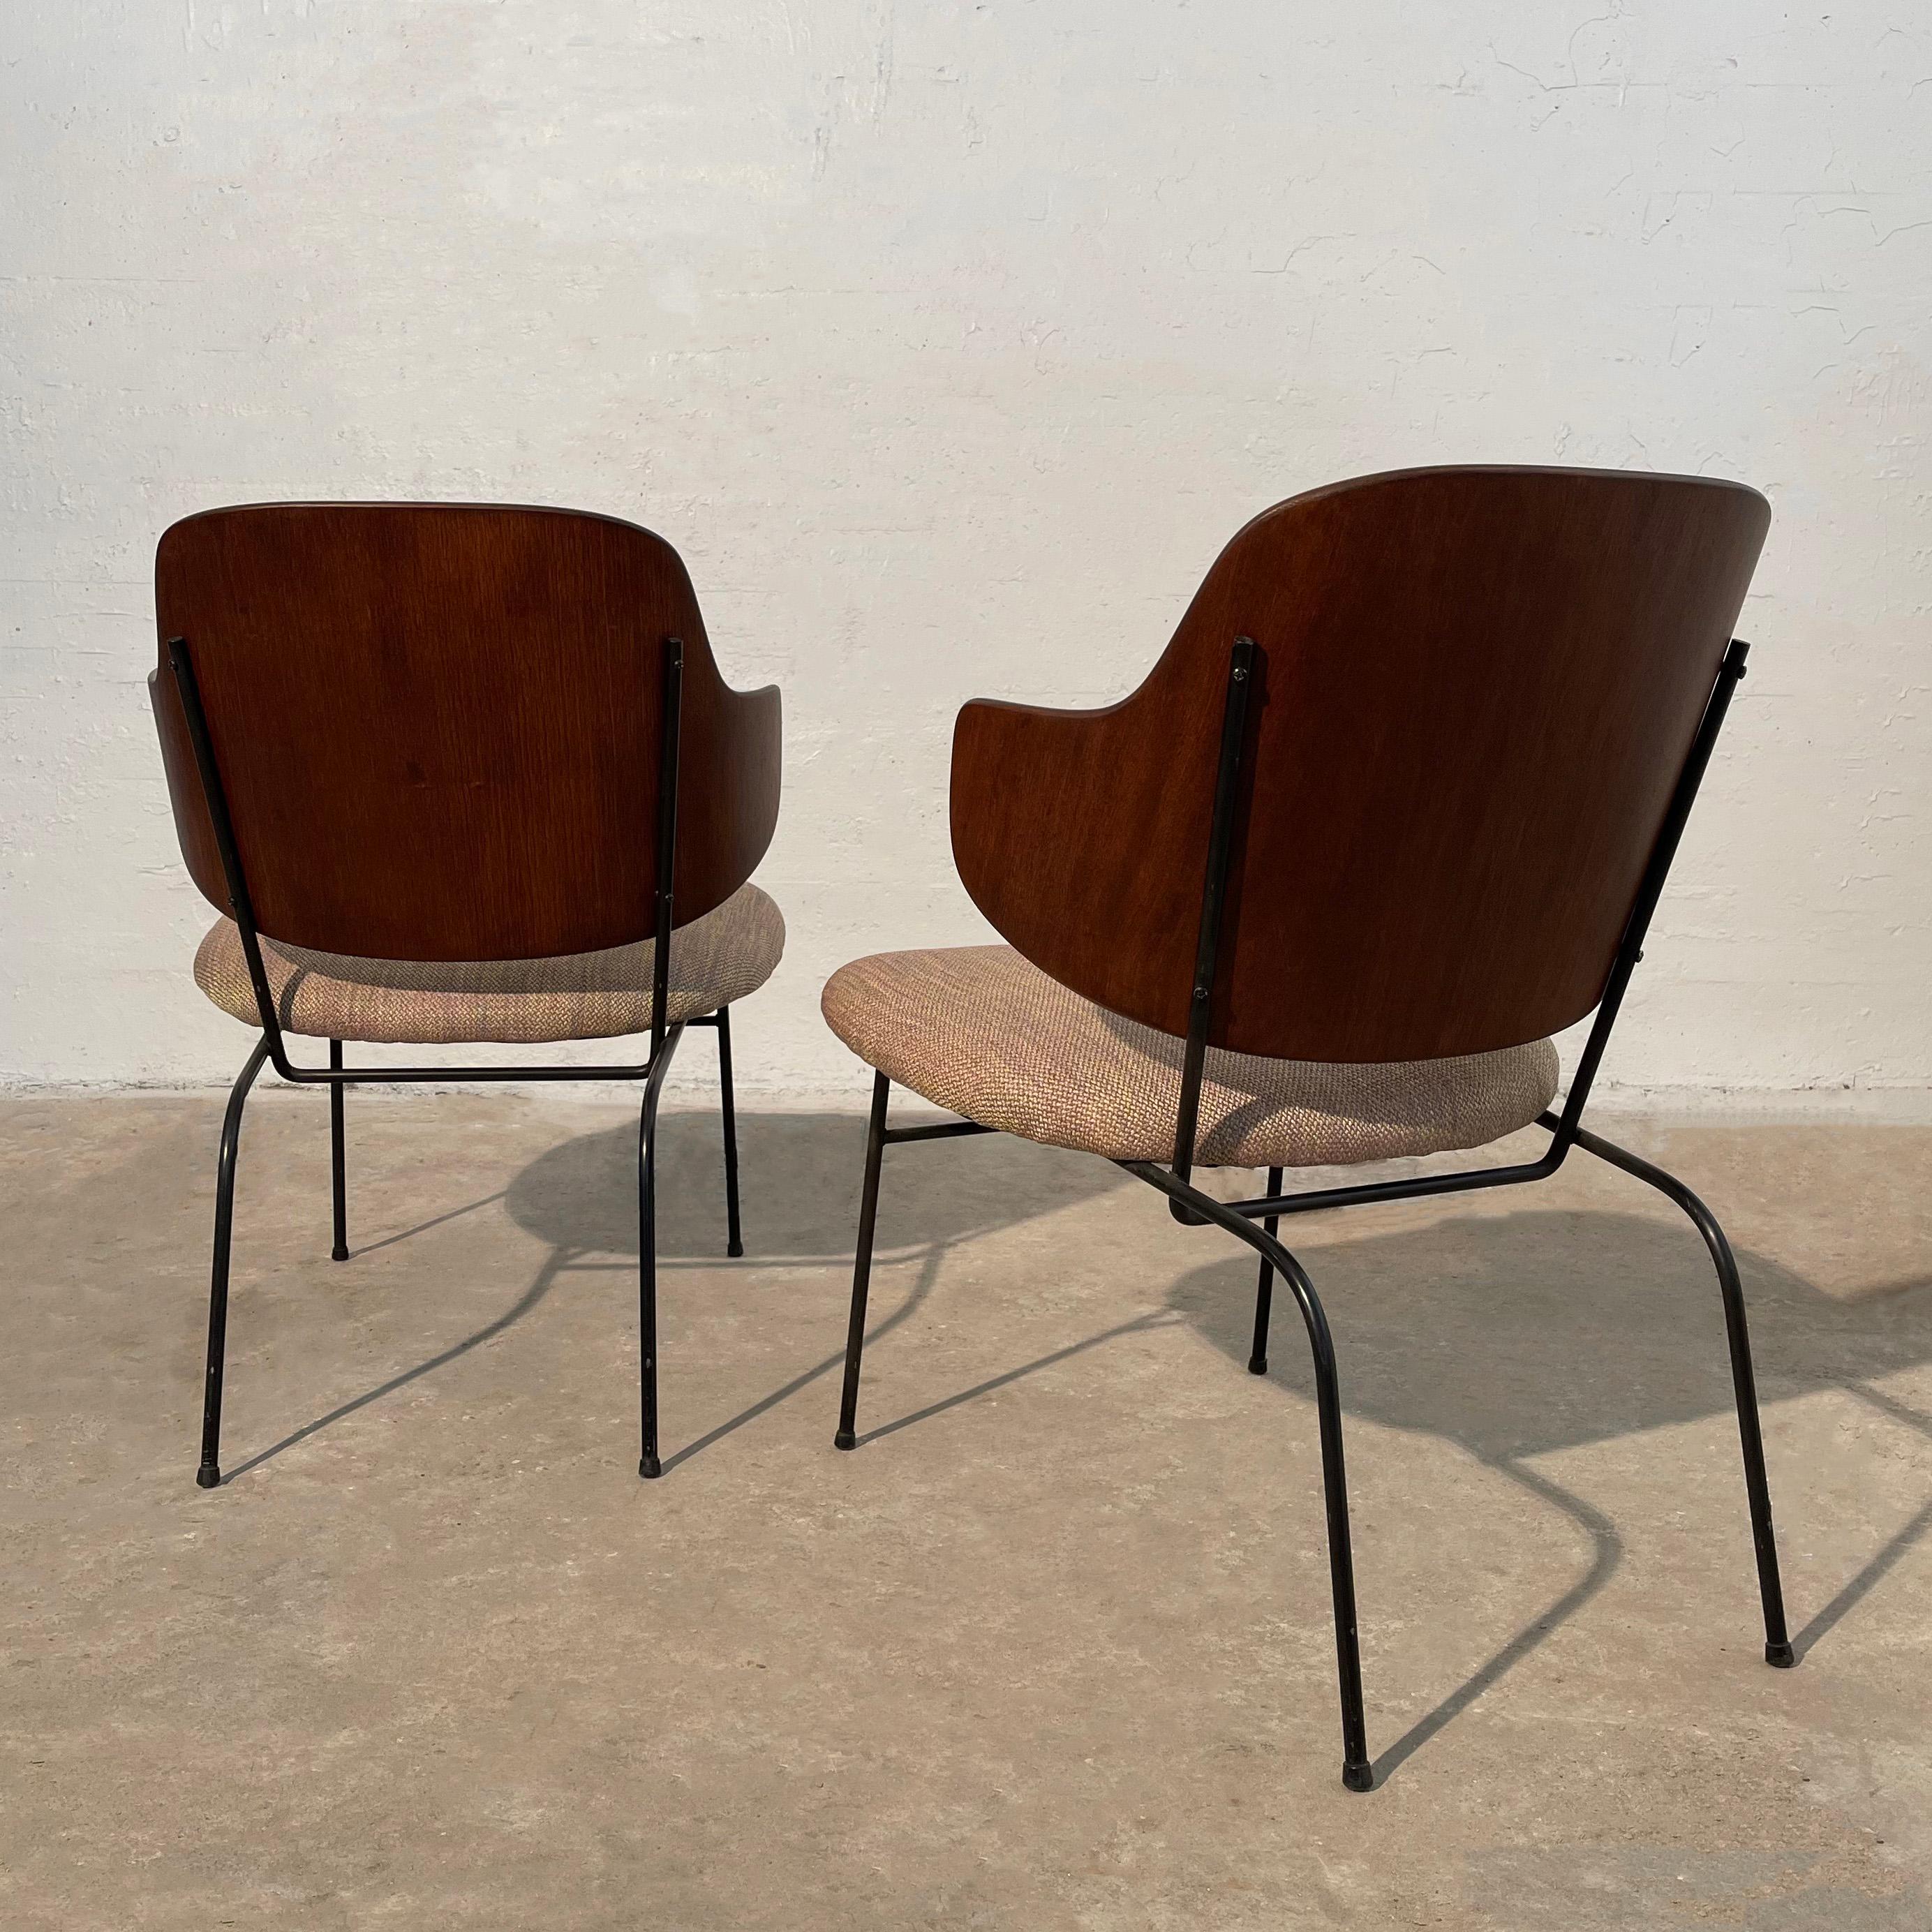 20th Century Pair Of Rare Model Penguin Chairs By Ib Kofod-Larsen For Selig For Sale